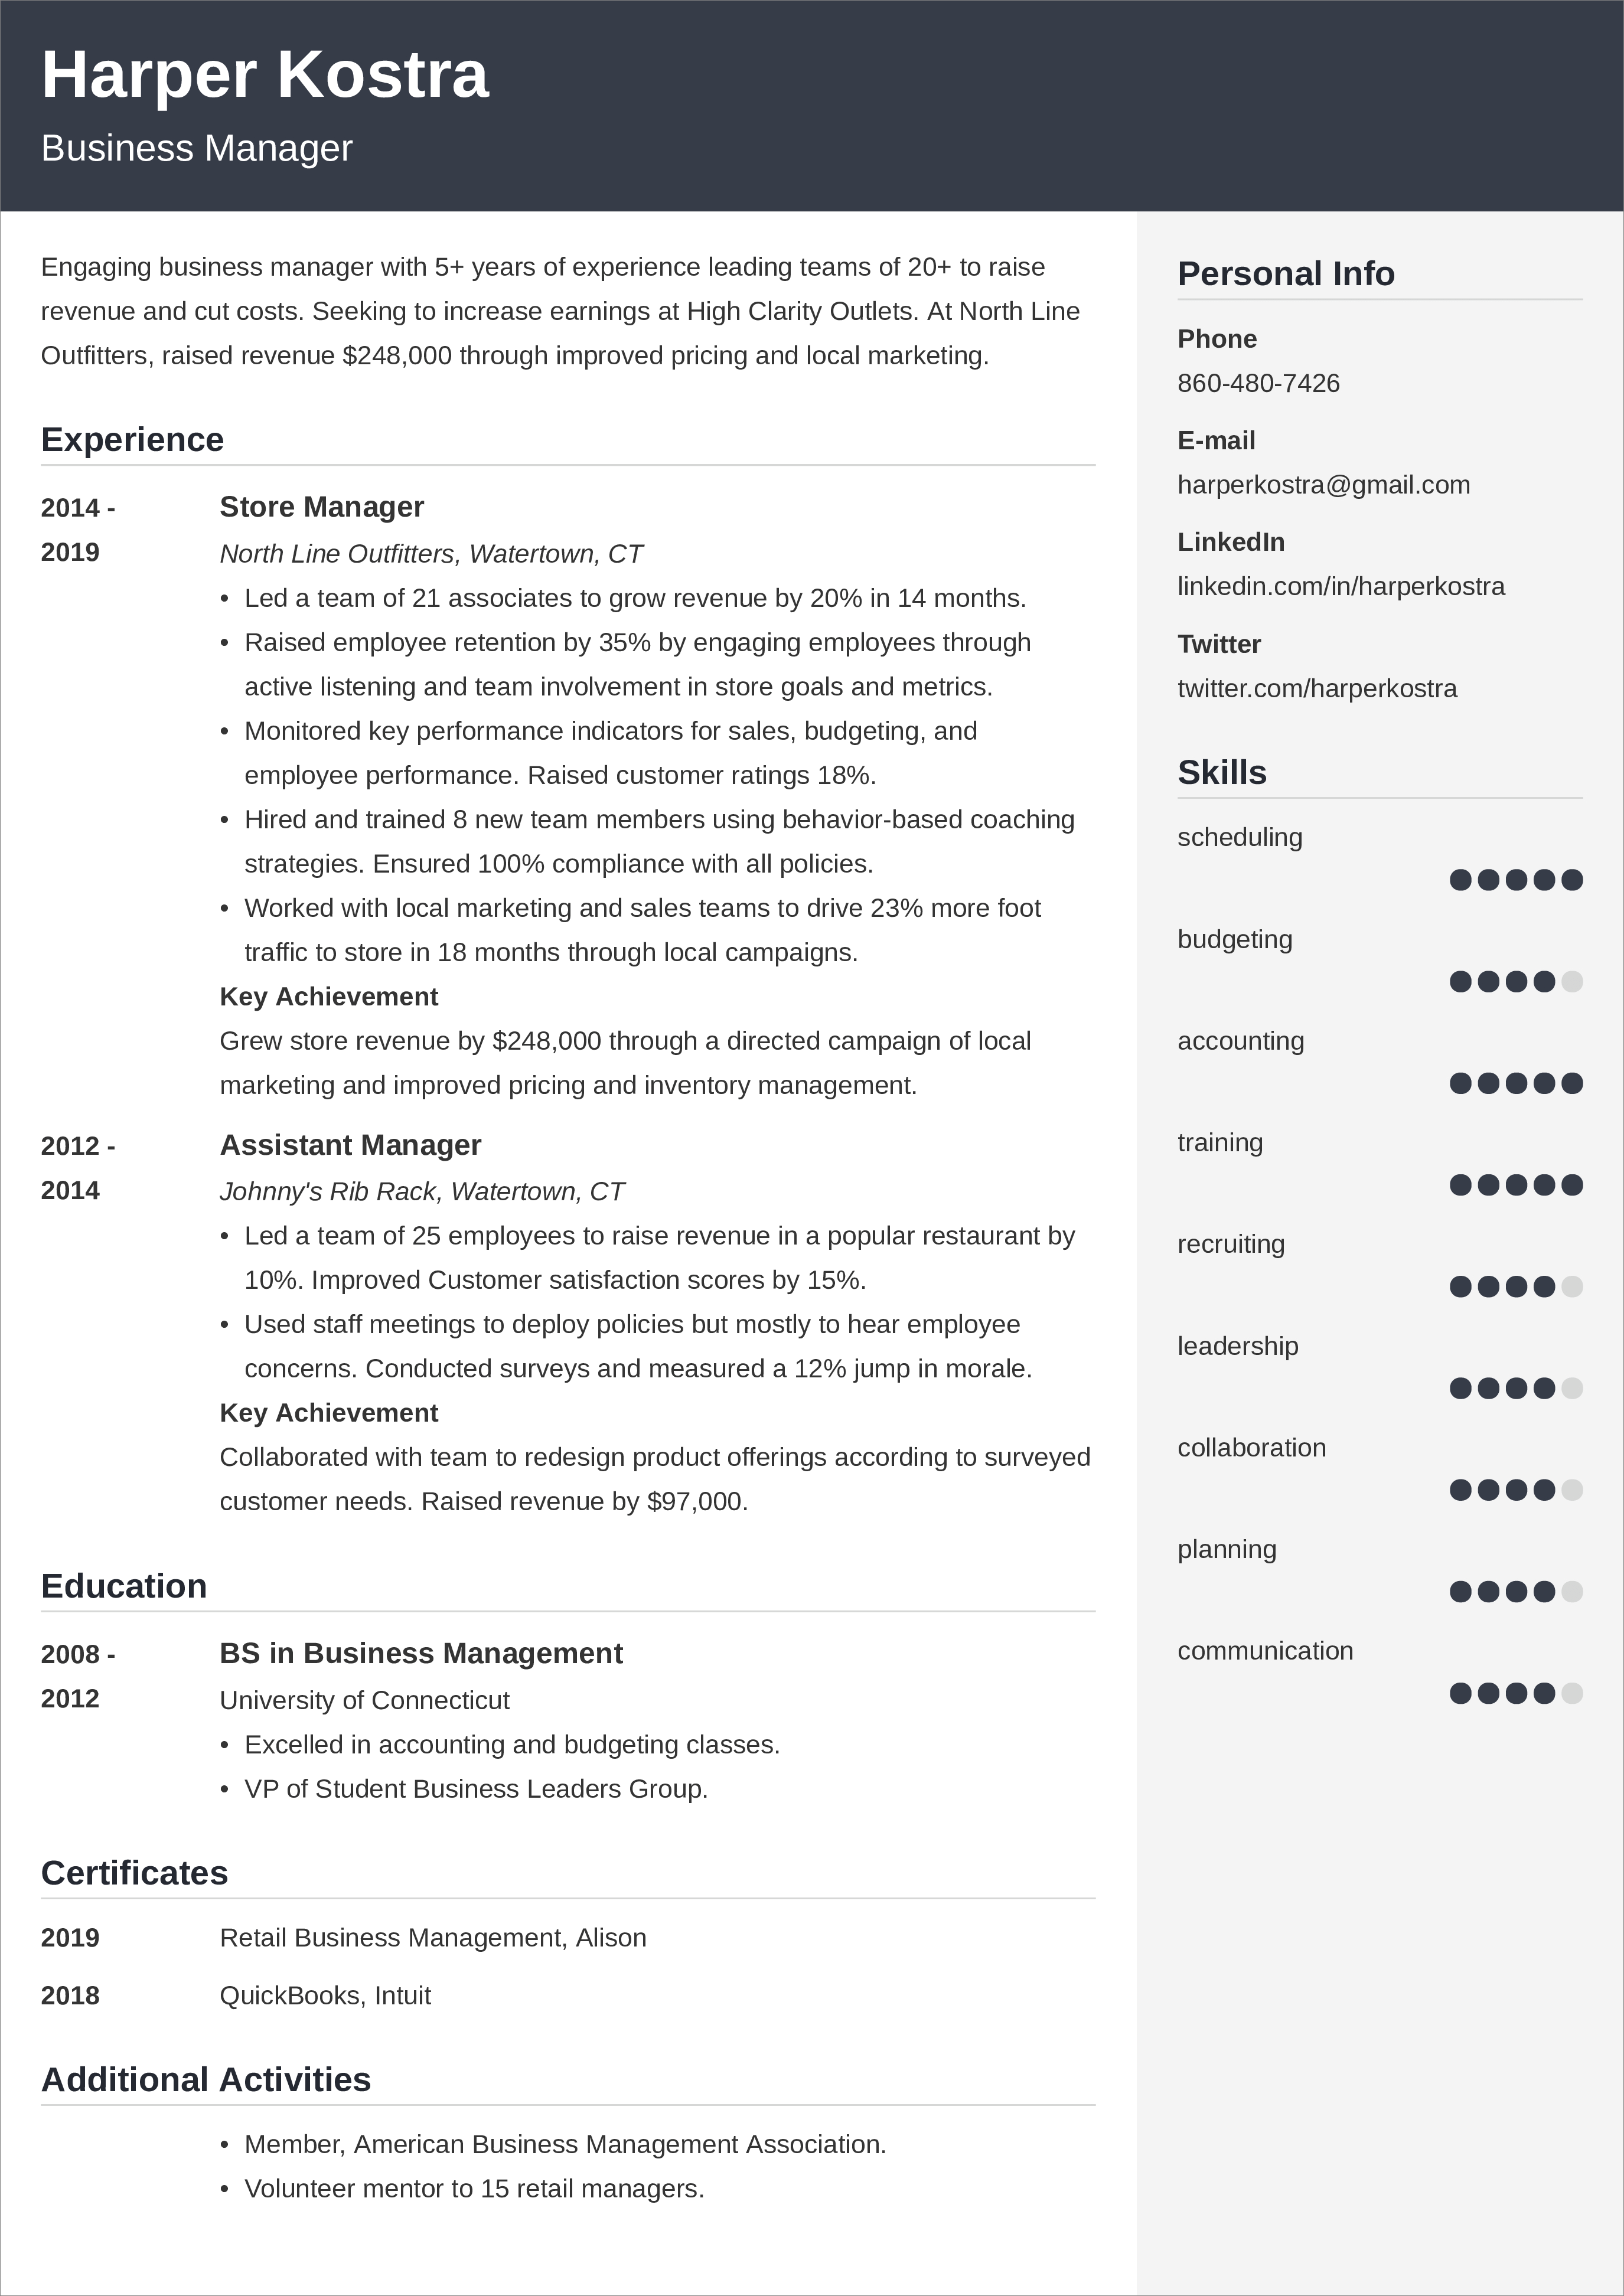 Business Manager CV Examples and Writing Guide